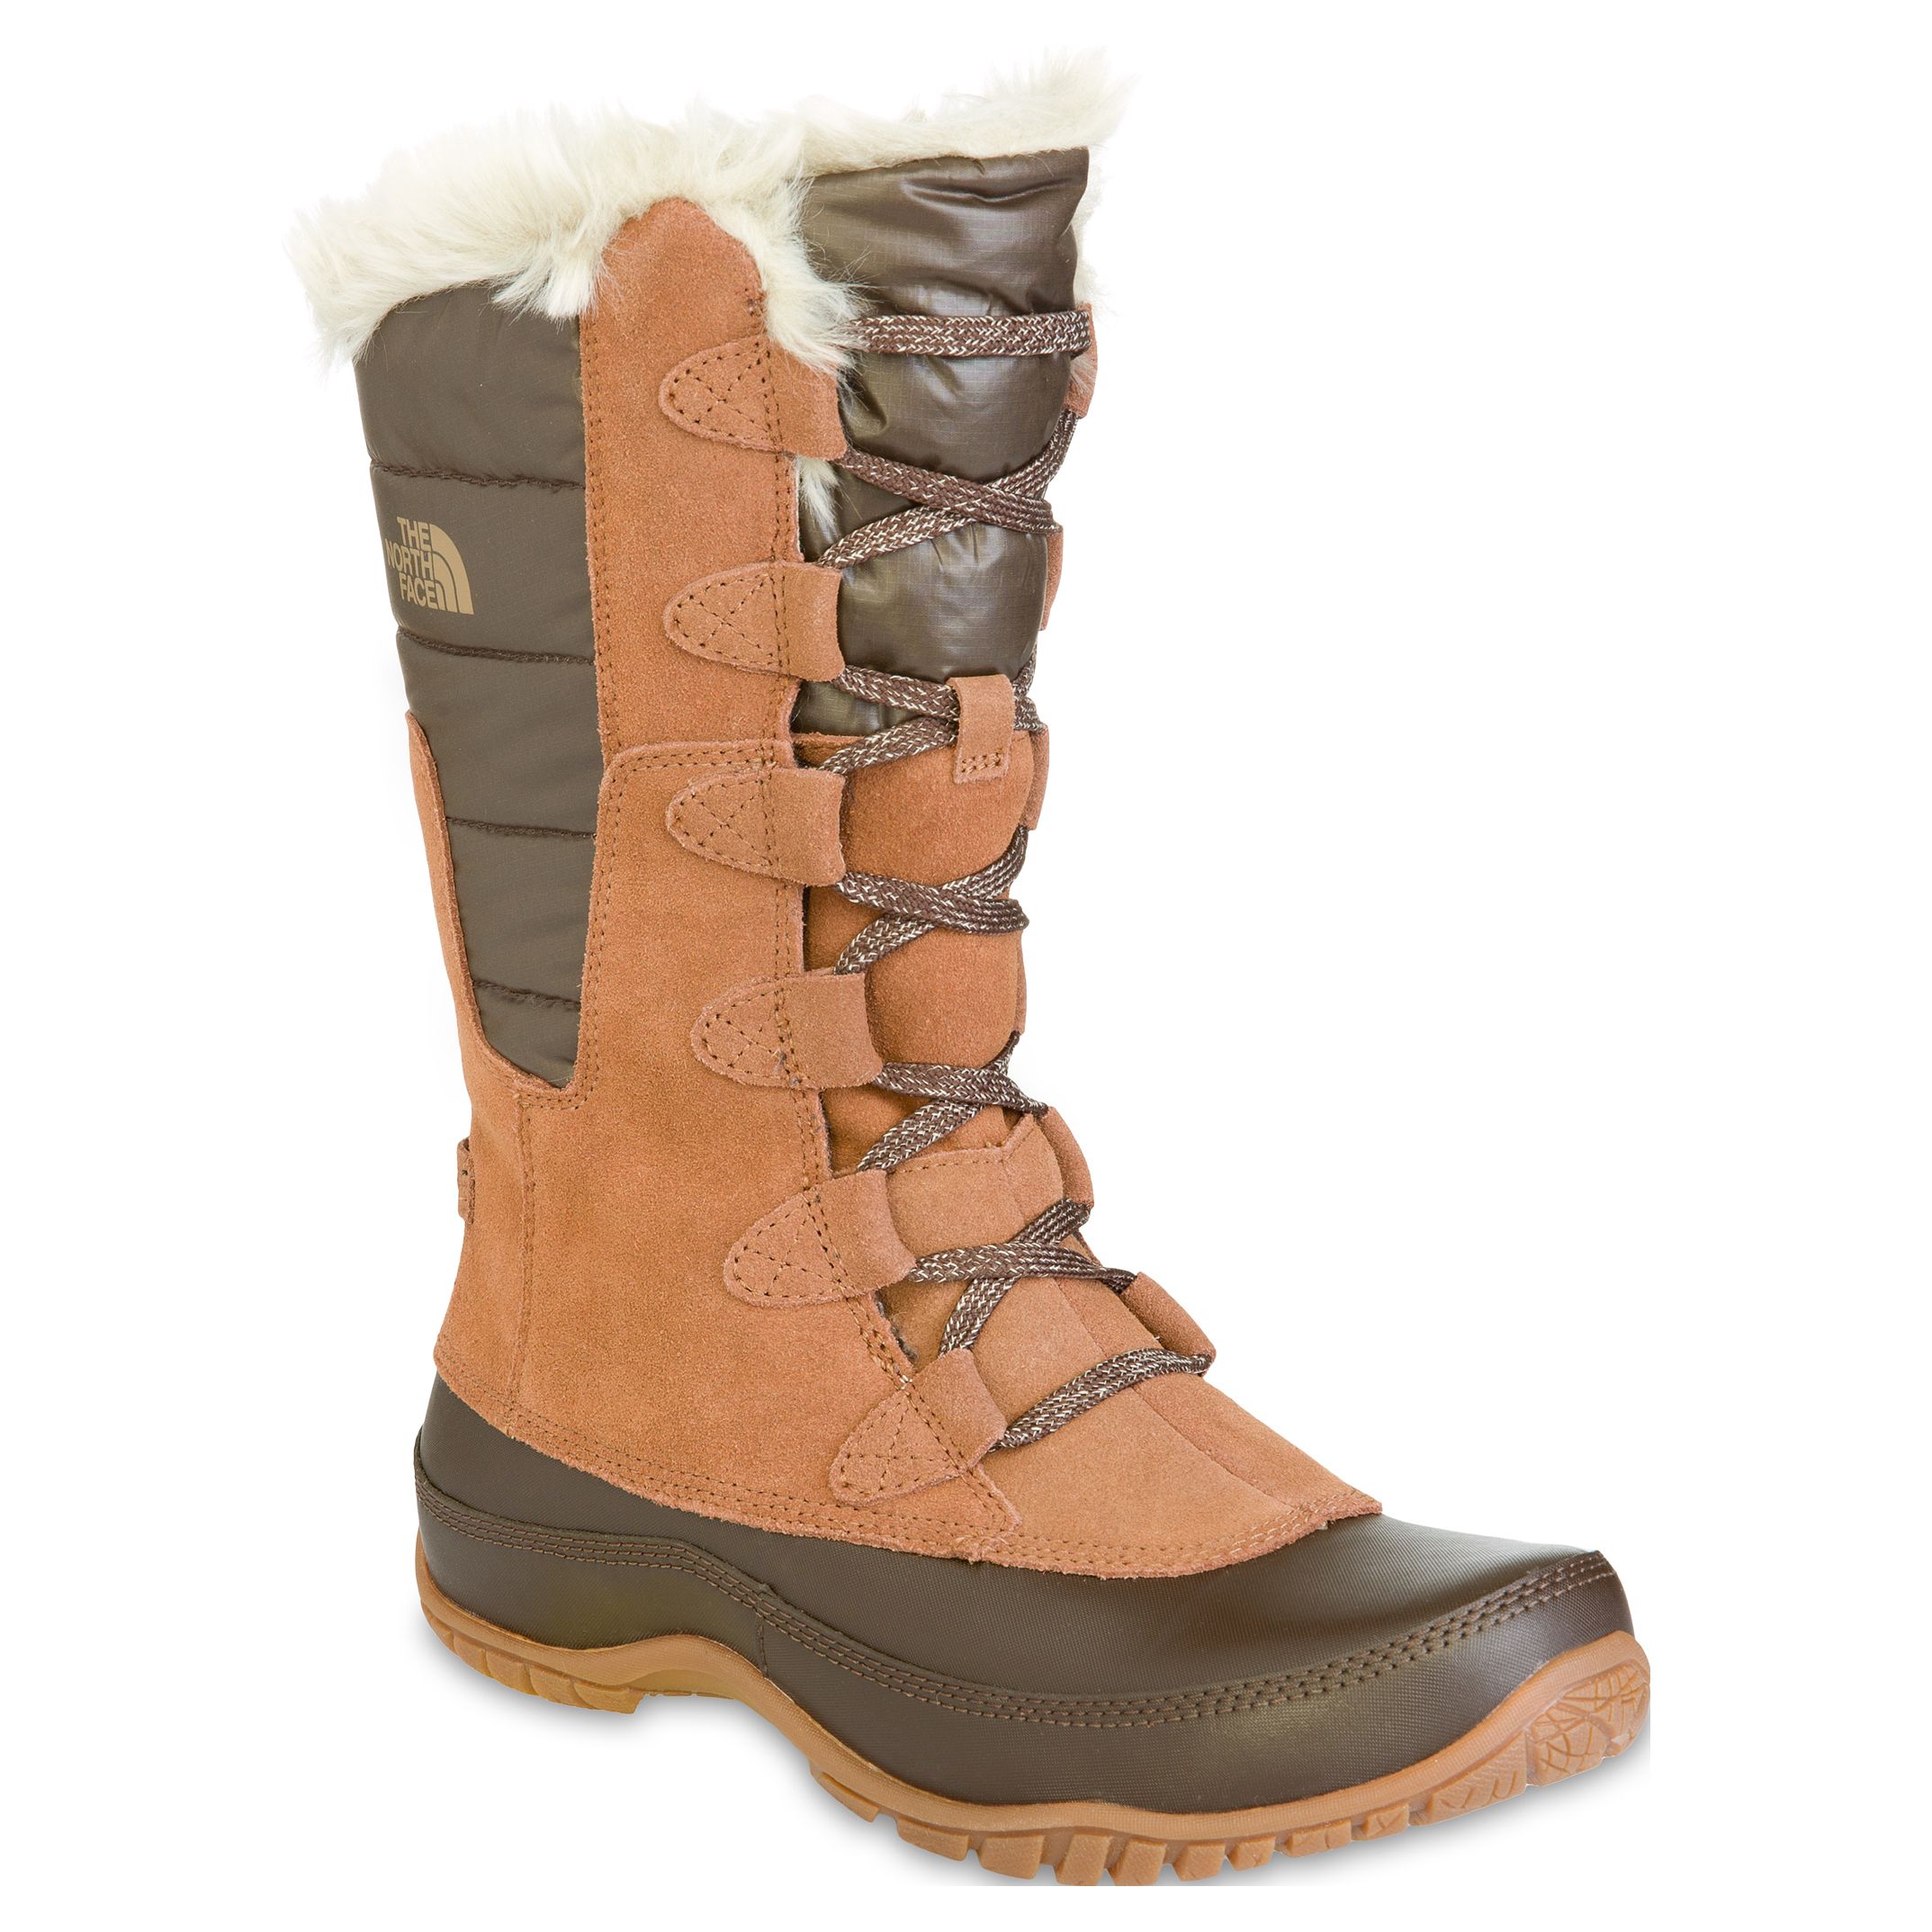 The North Face Nuptse Purna Women's Leather Snow Boots